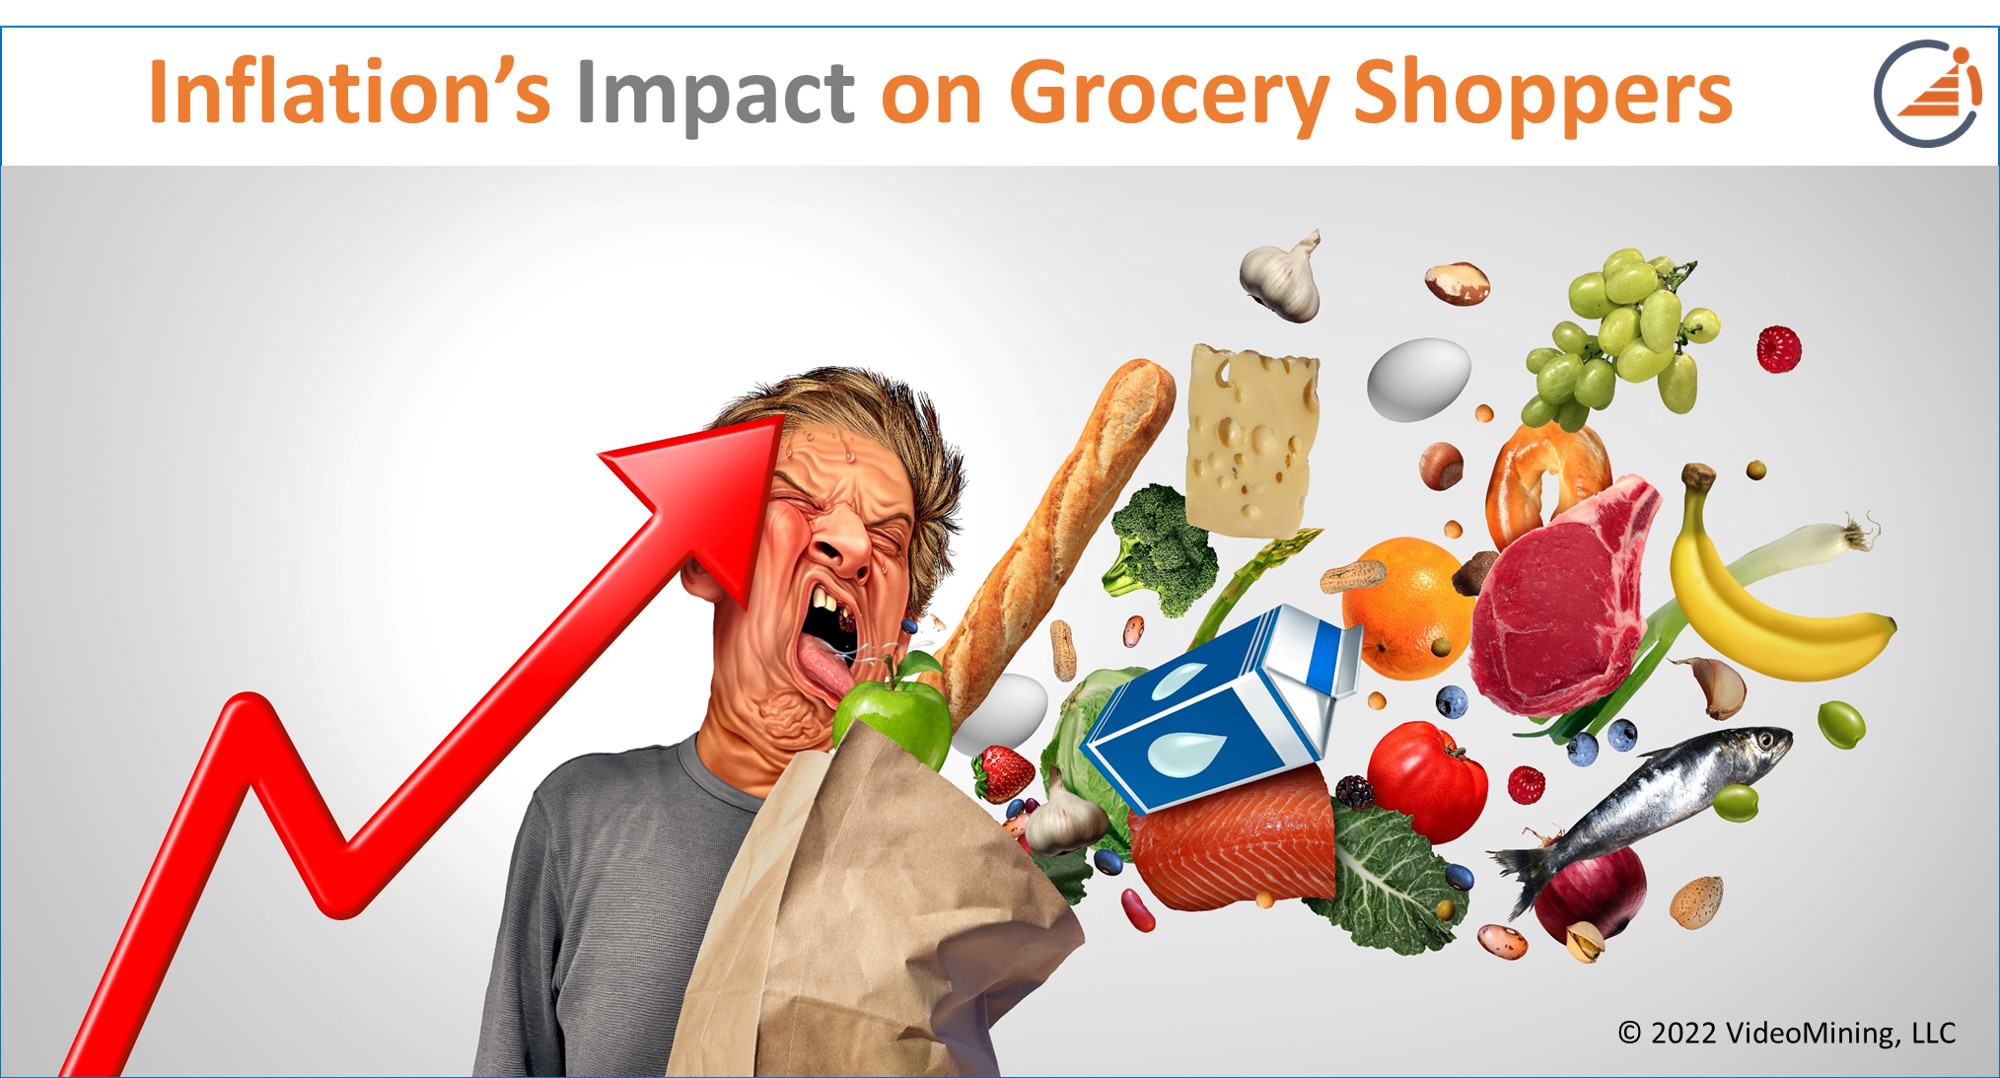 Inflation’s Impact on Grocery Shoppers